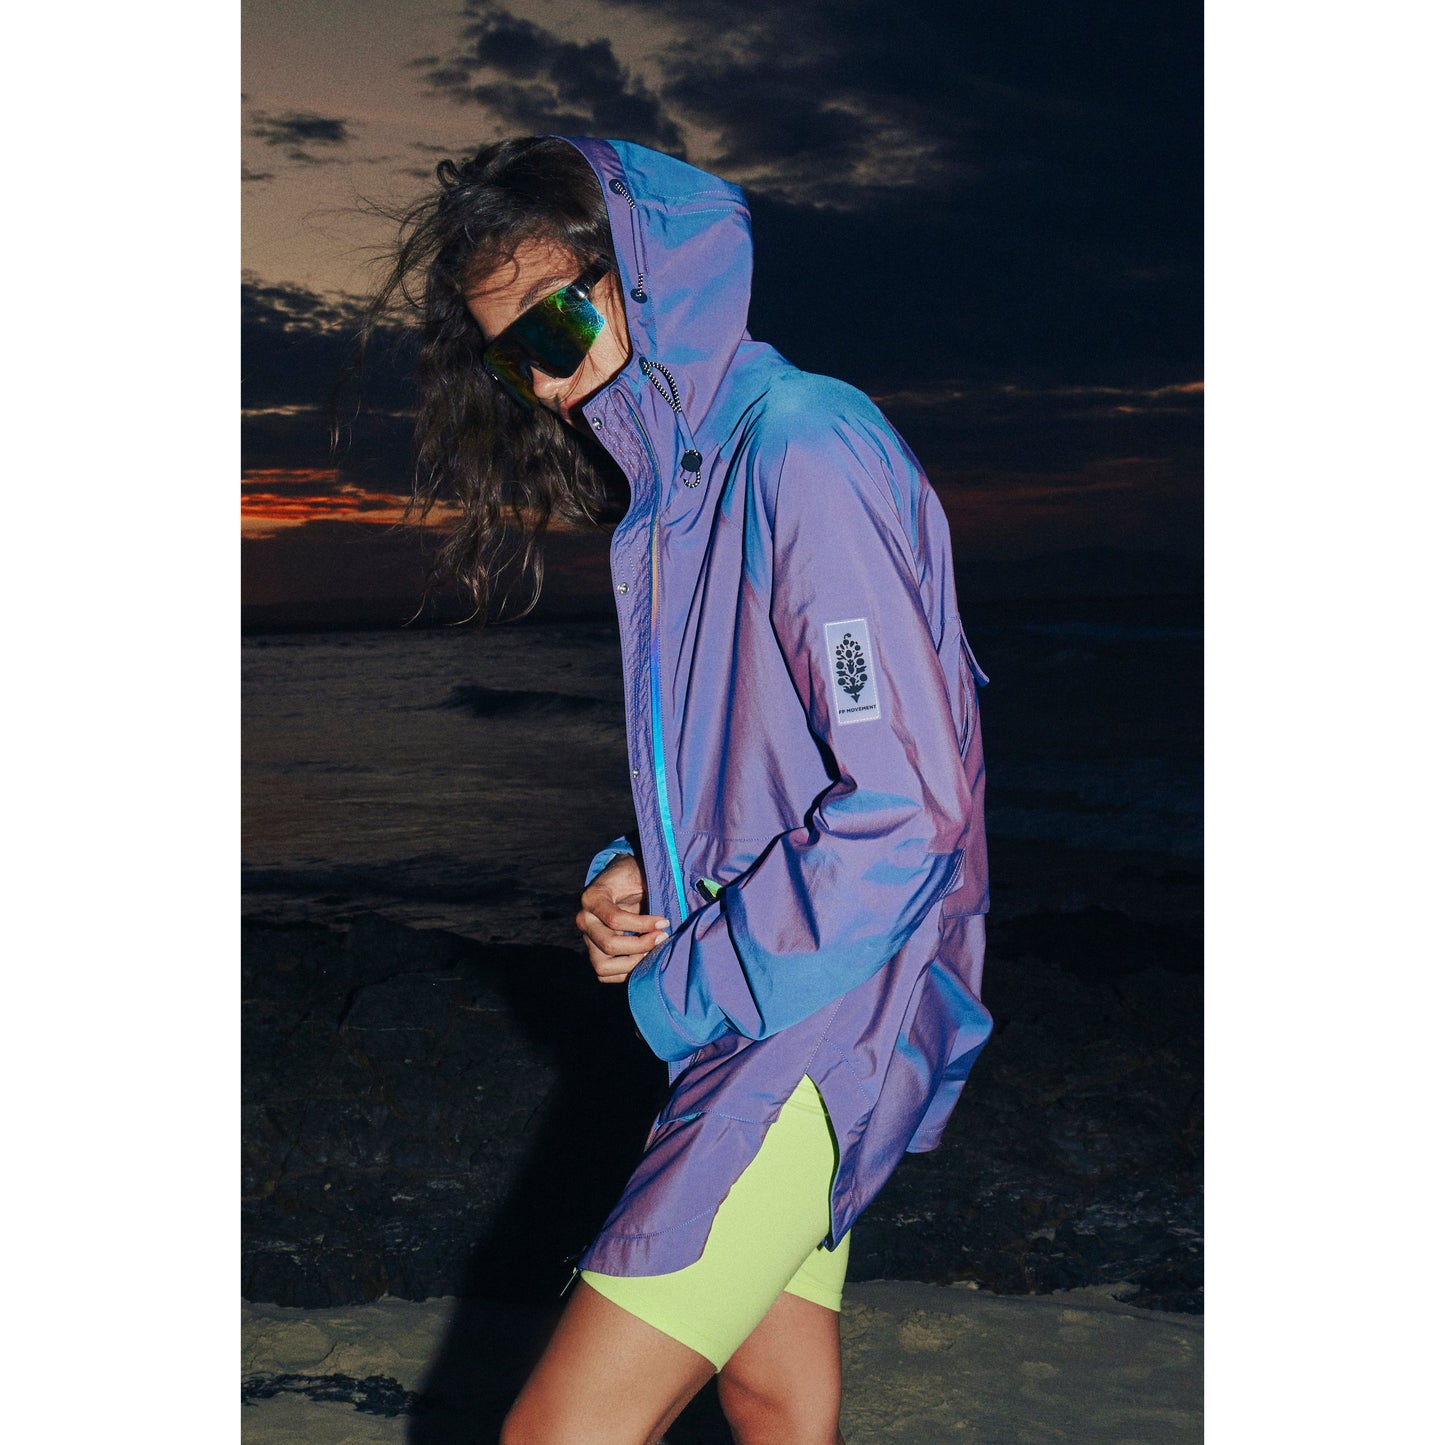 Woman in a Singin in the Rain Jacket, Iridescent Blue Iris by Free People Movement, and sunglasses standing by the sea at sunset, with her hair blowing in the wind.